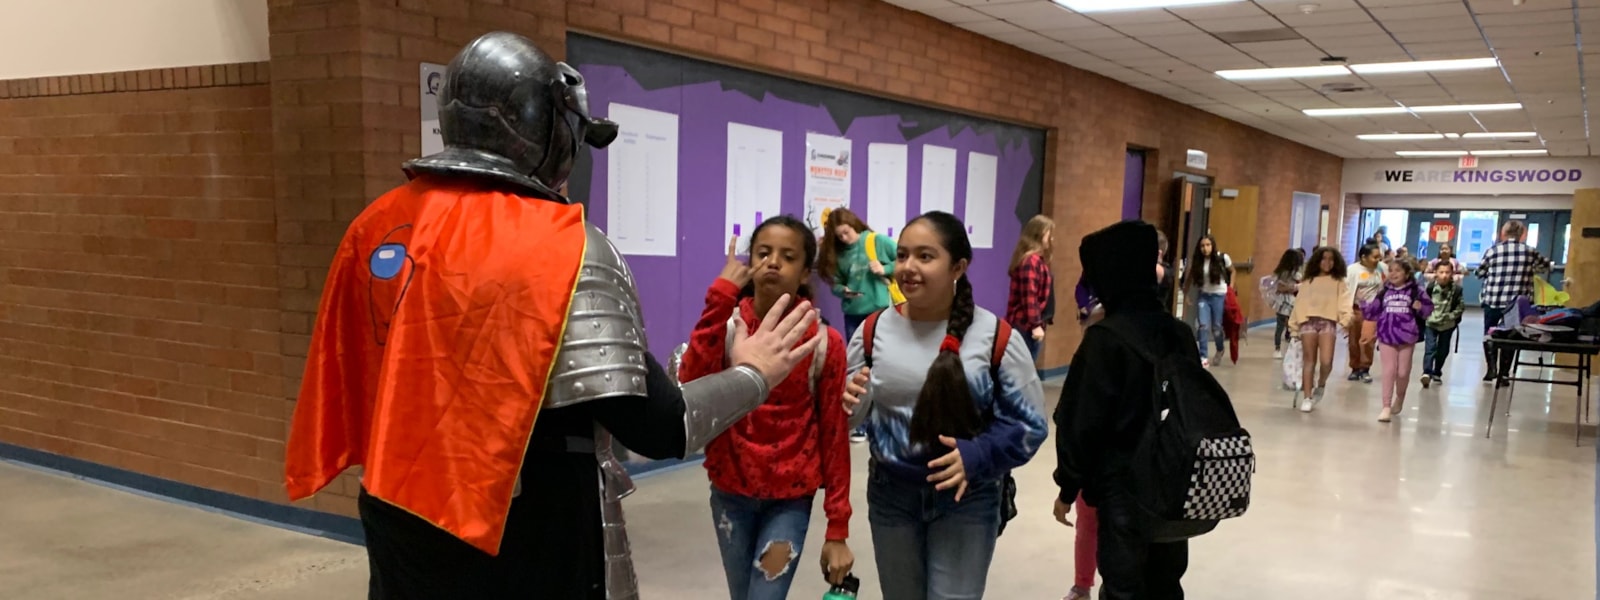 Kingswood's Knight with students